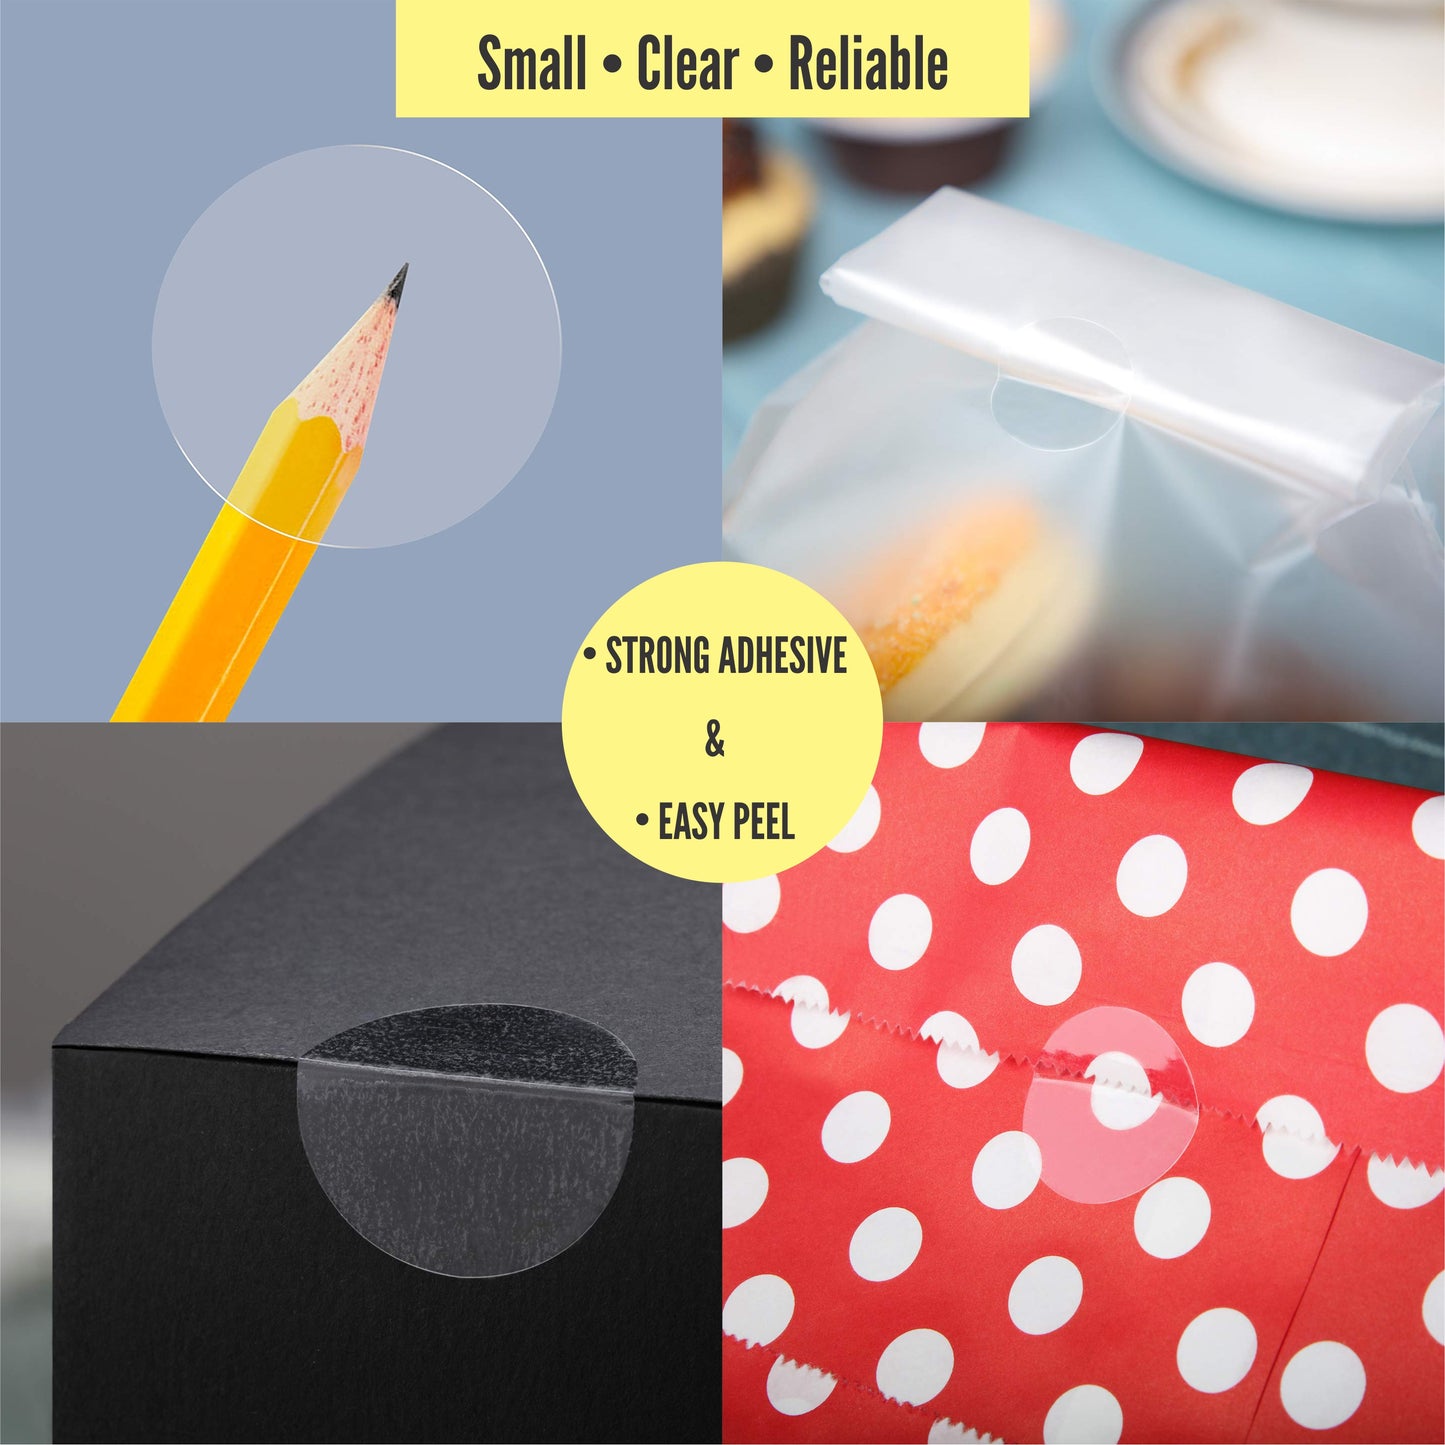 iberry's 1 inch Diameter Transparent Stickers|Transparent Stickers to Seal Boxes and Envelopes|Stickers for Order Packing